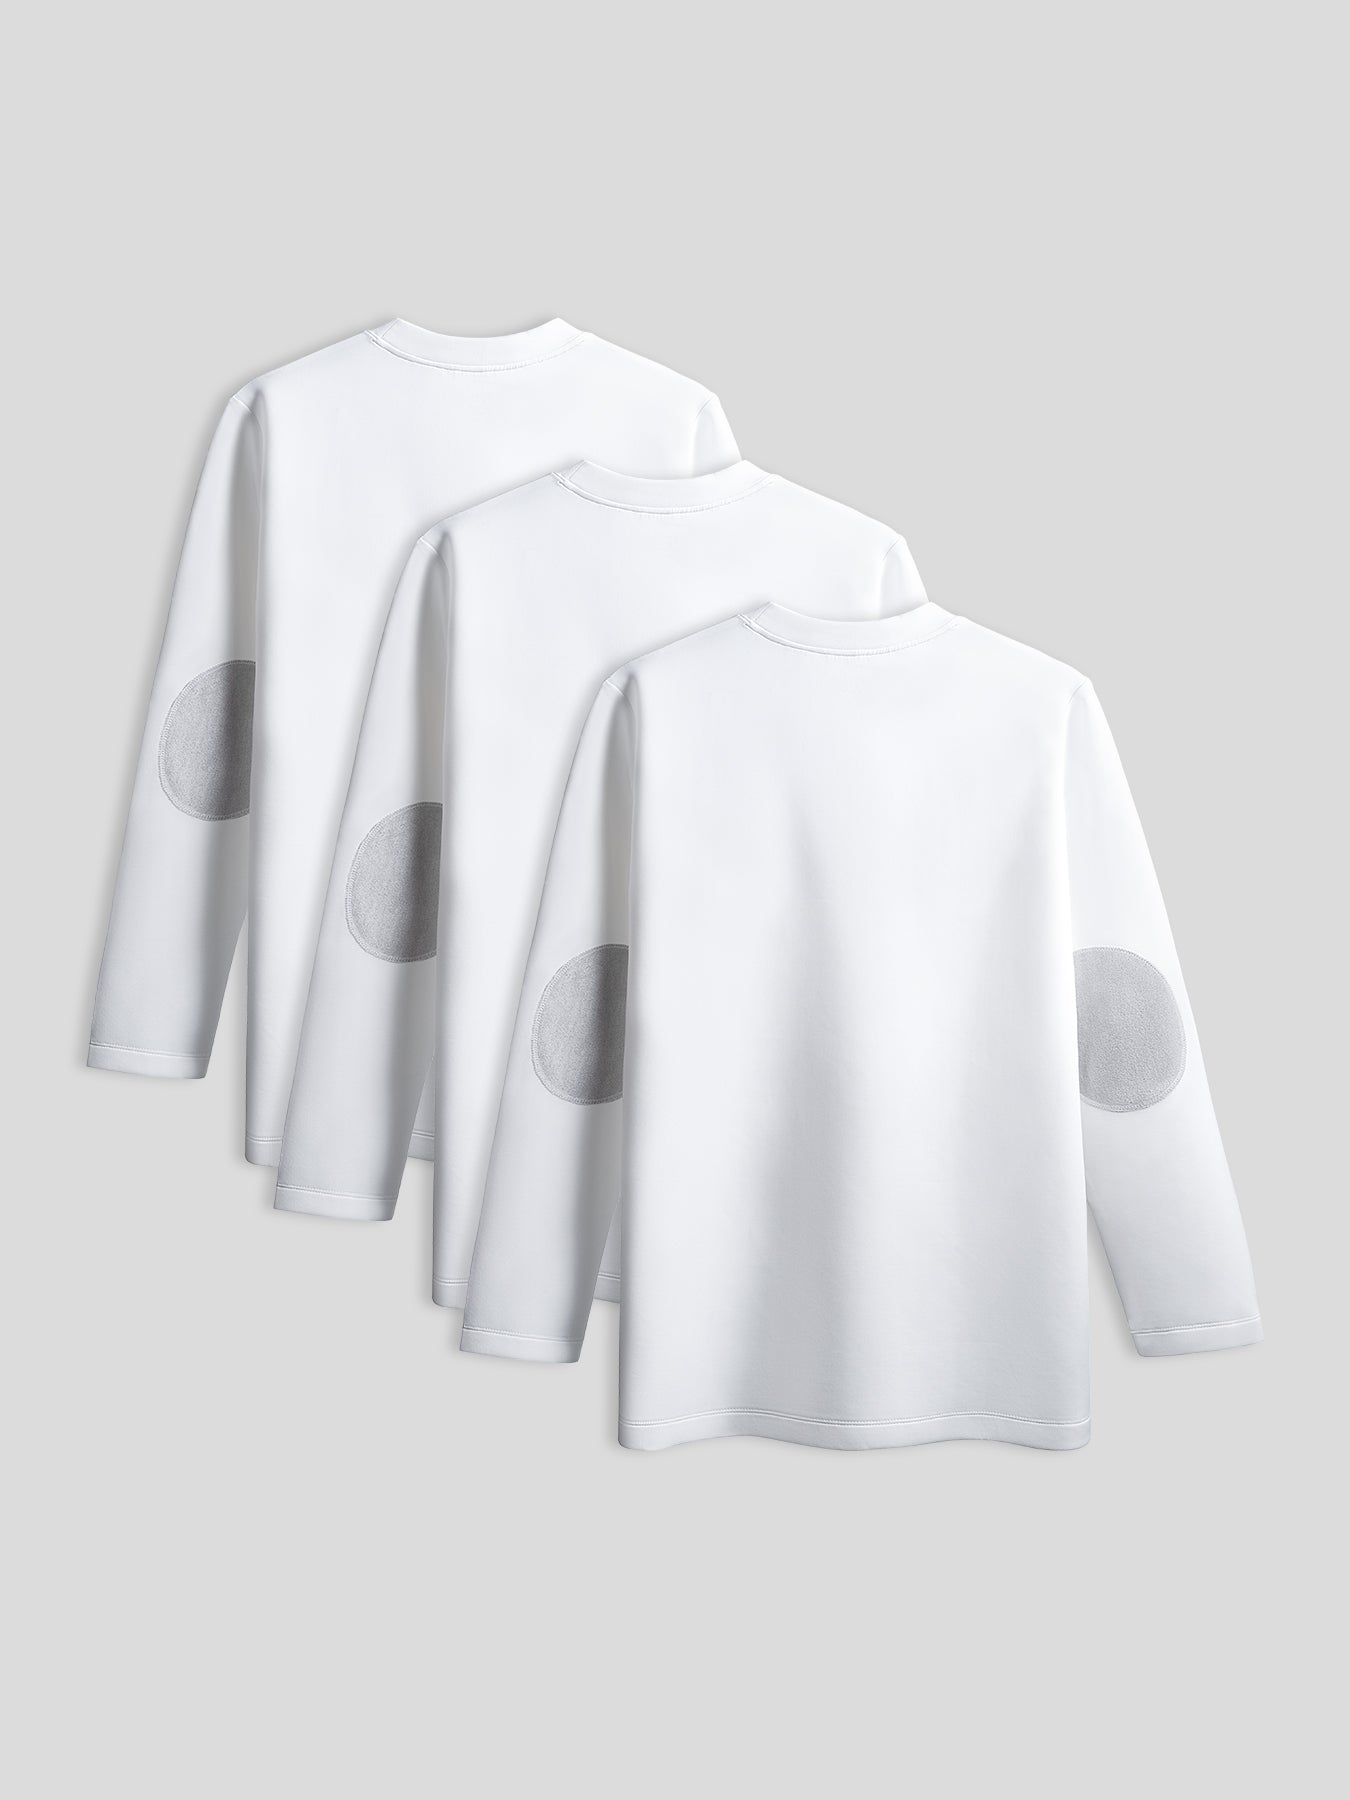 Modal Blend Elbow Patch Long Sleeve Tee 3-Pack